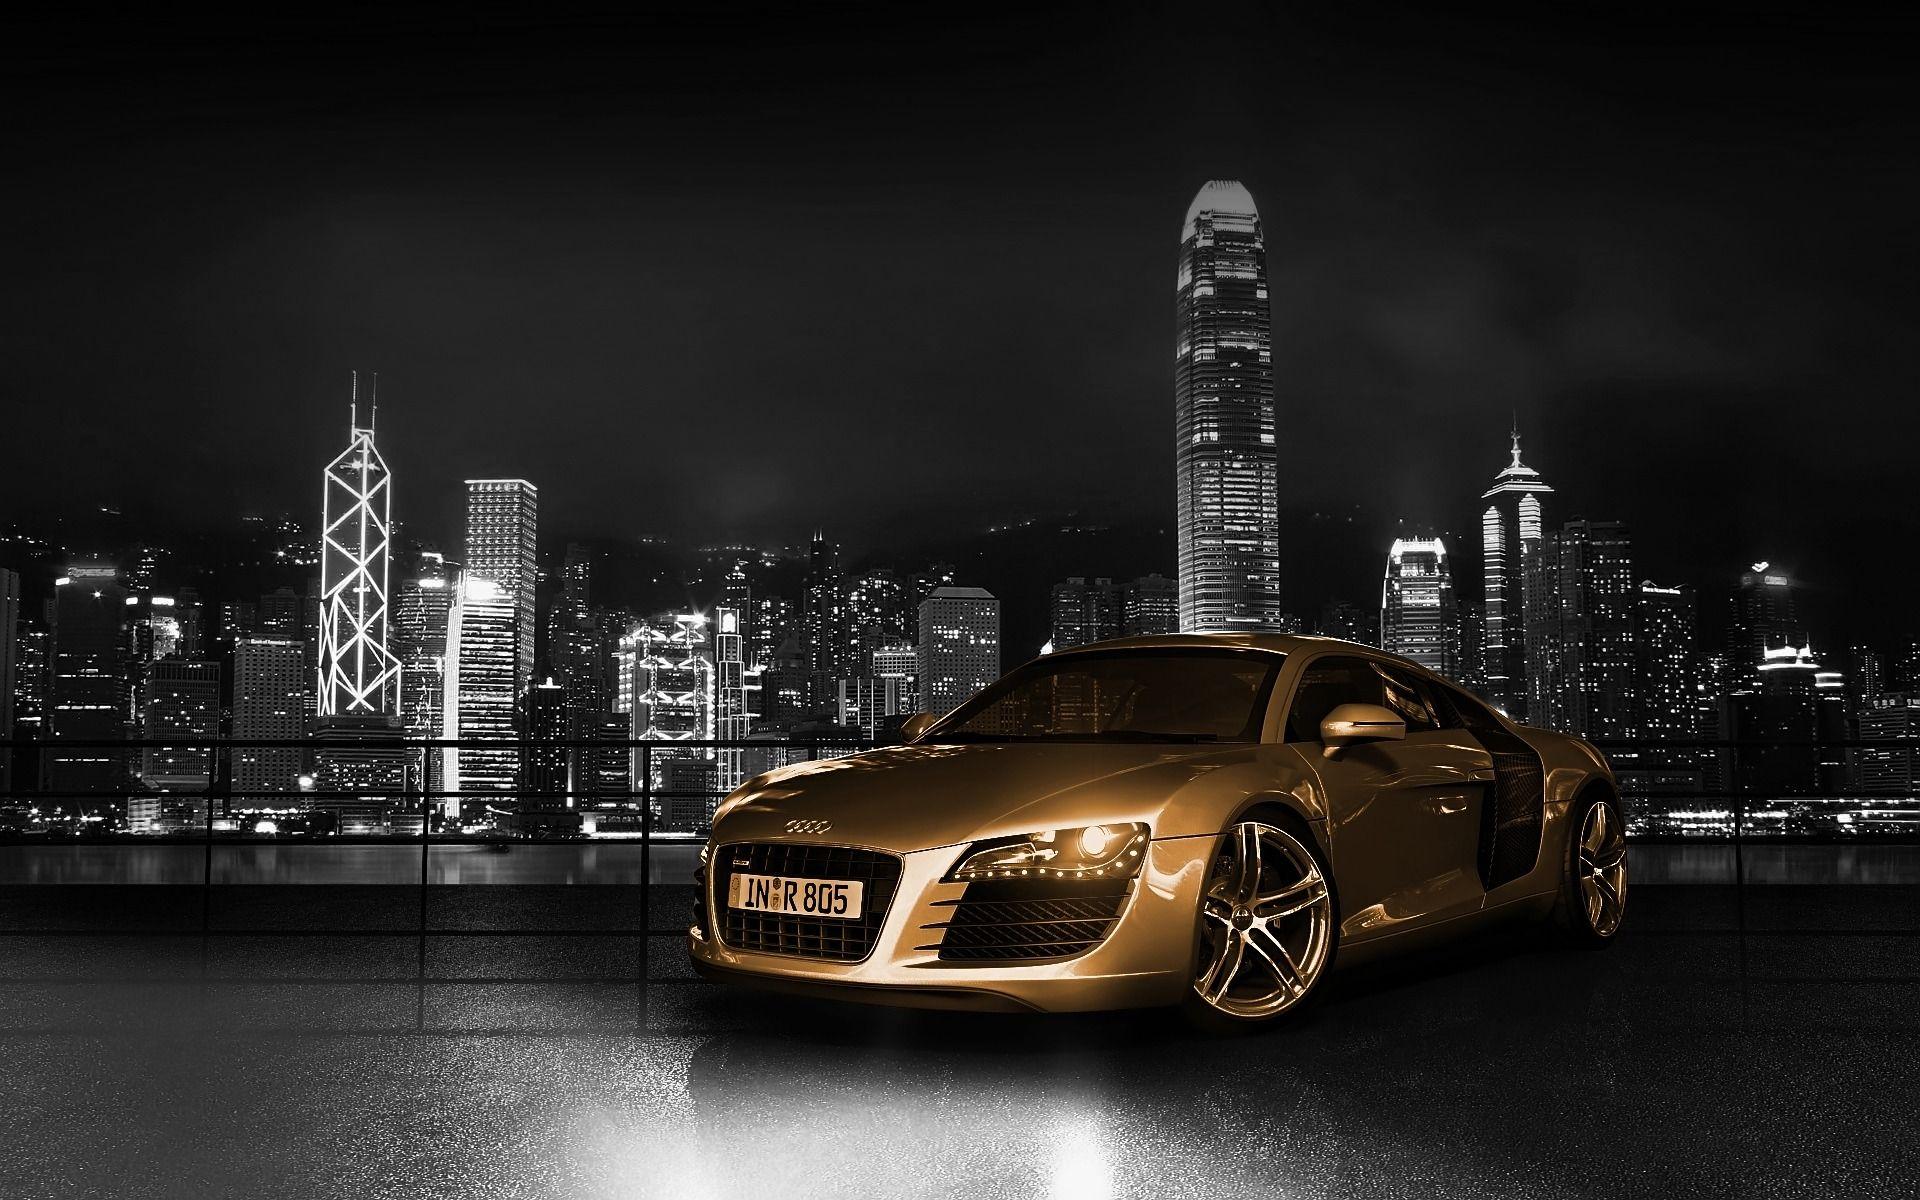 Gold Audi R8 Wallpapers Top Free Gold Audi R8 Backgrounds Wallpaperaccess